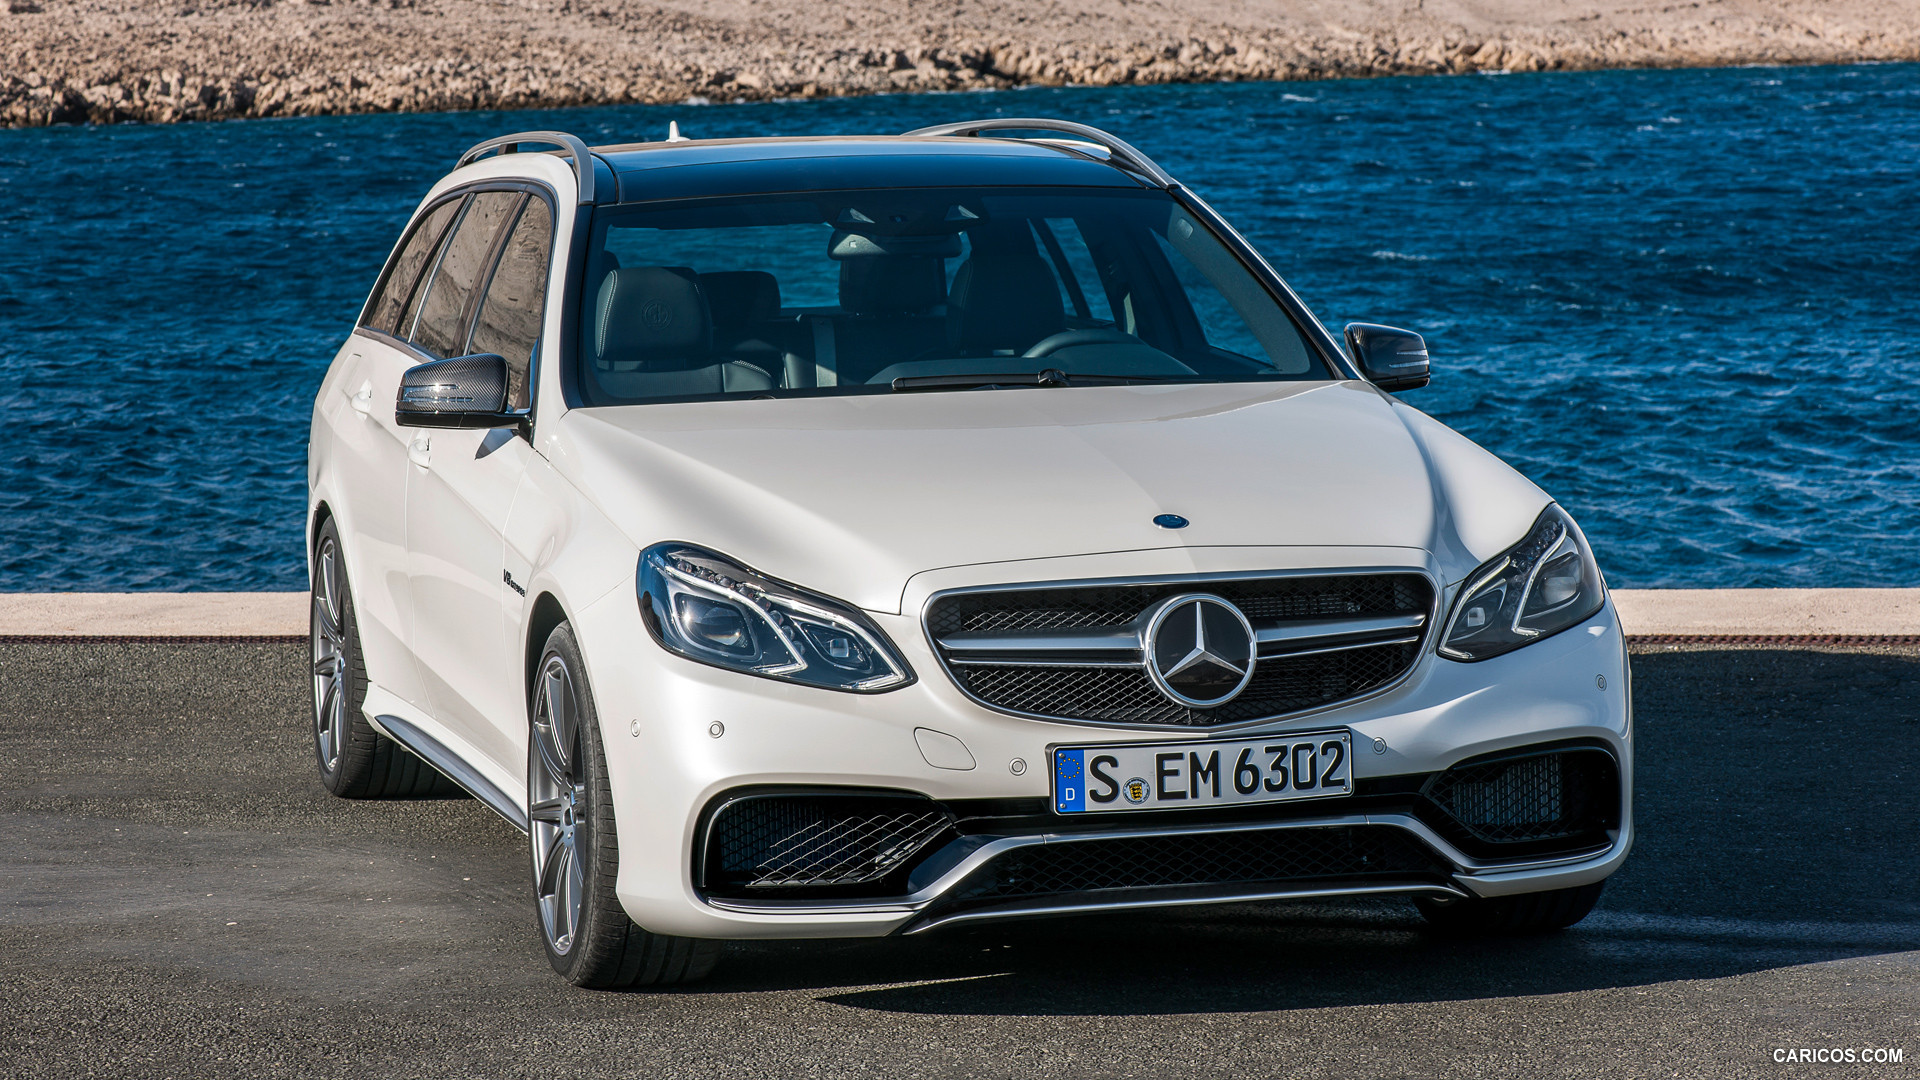 2014 Mercedes-Benz E 63 AMG S 4MATIC Estate  - Front, #11 of 18